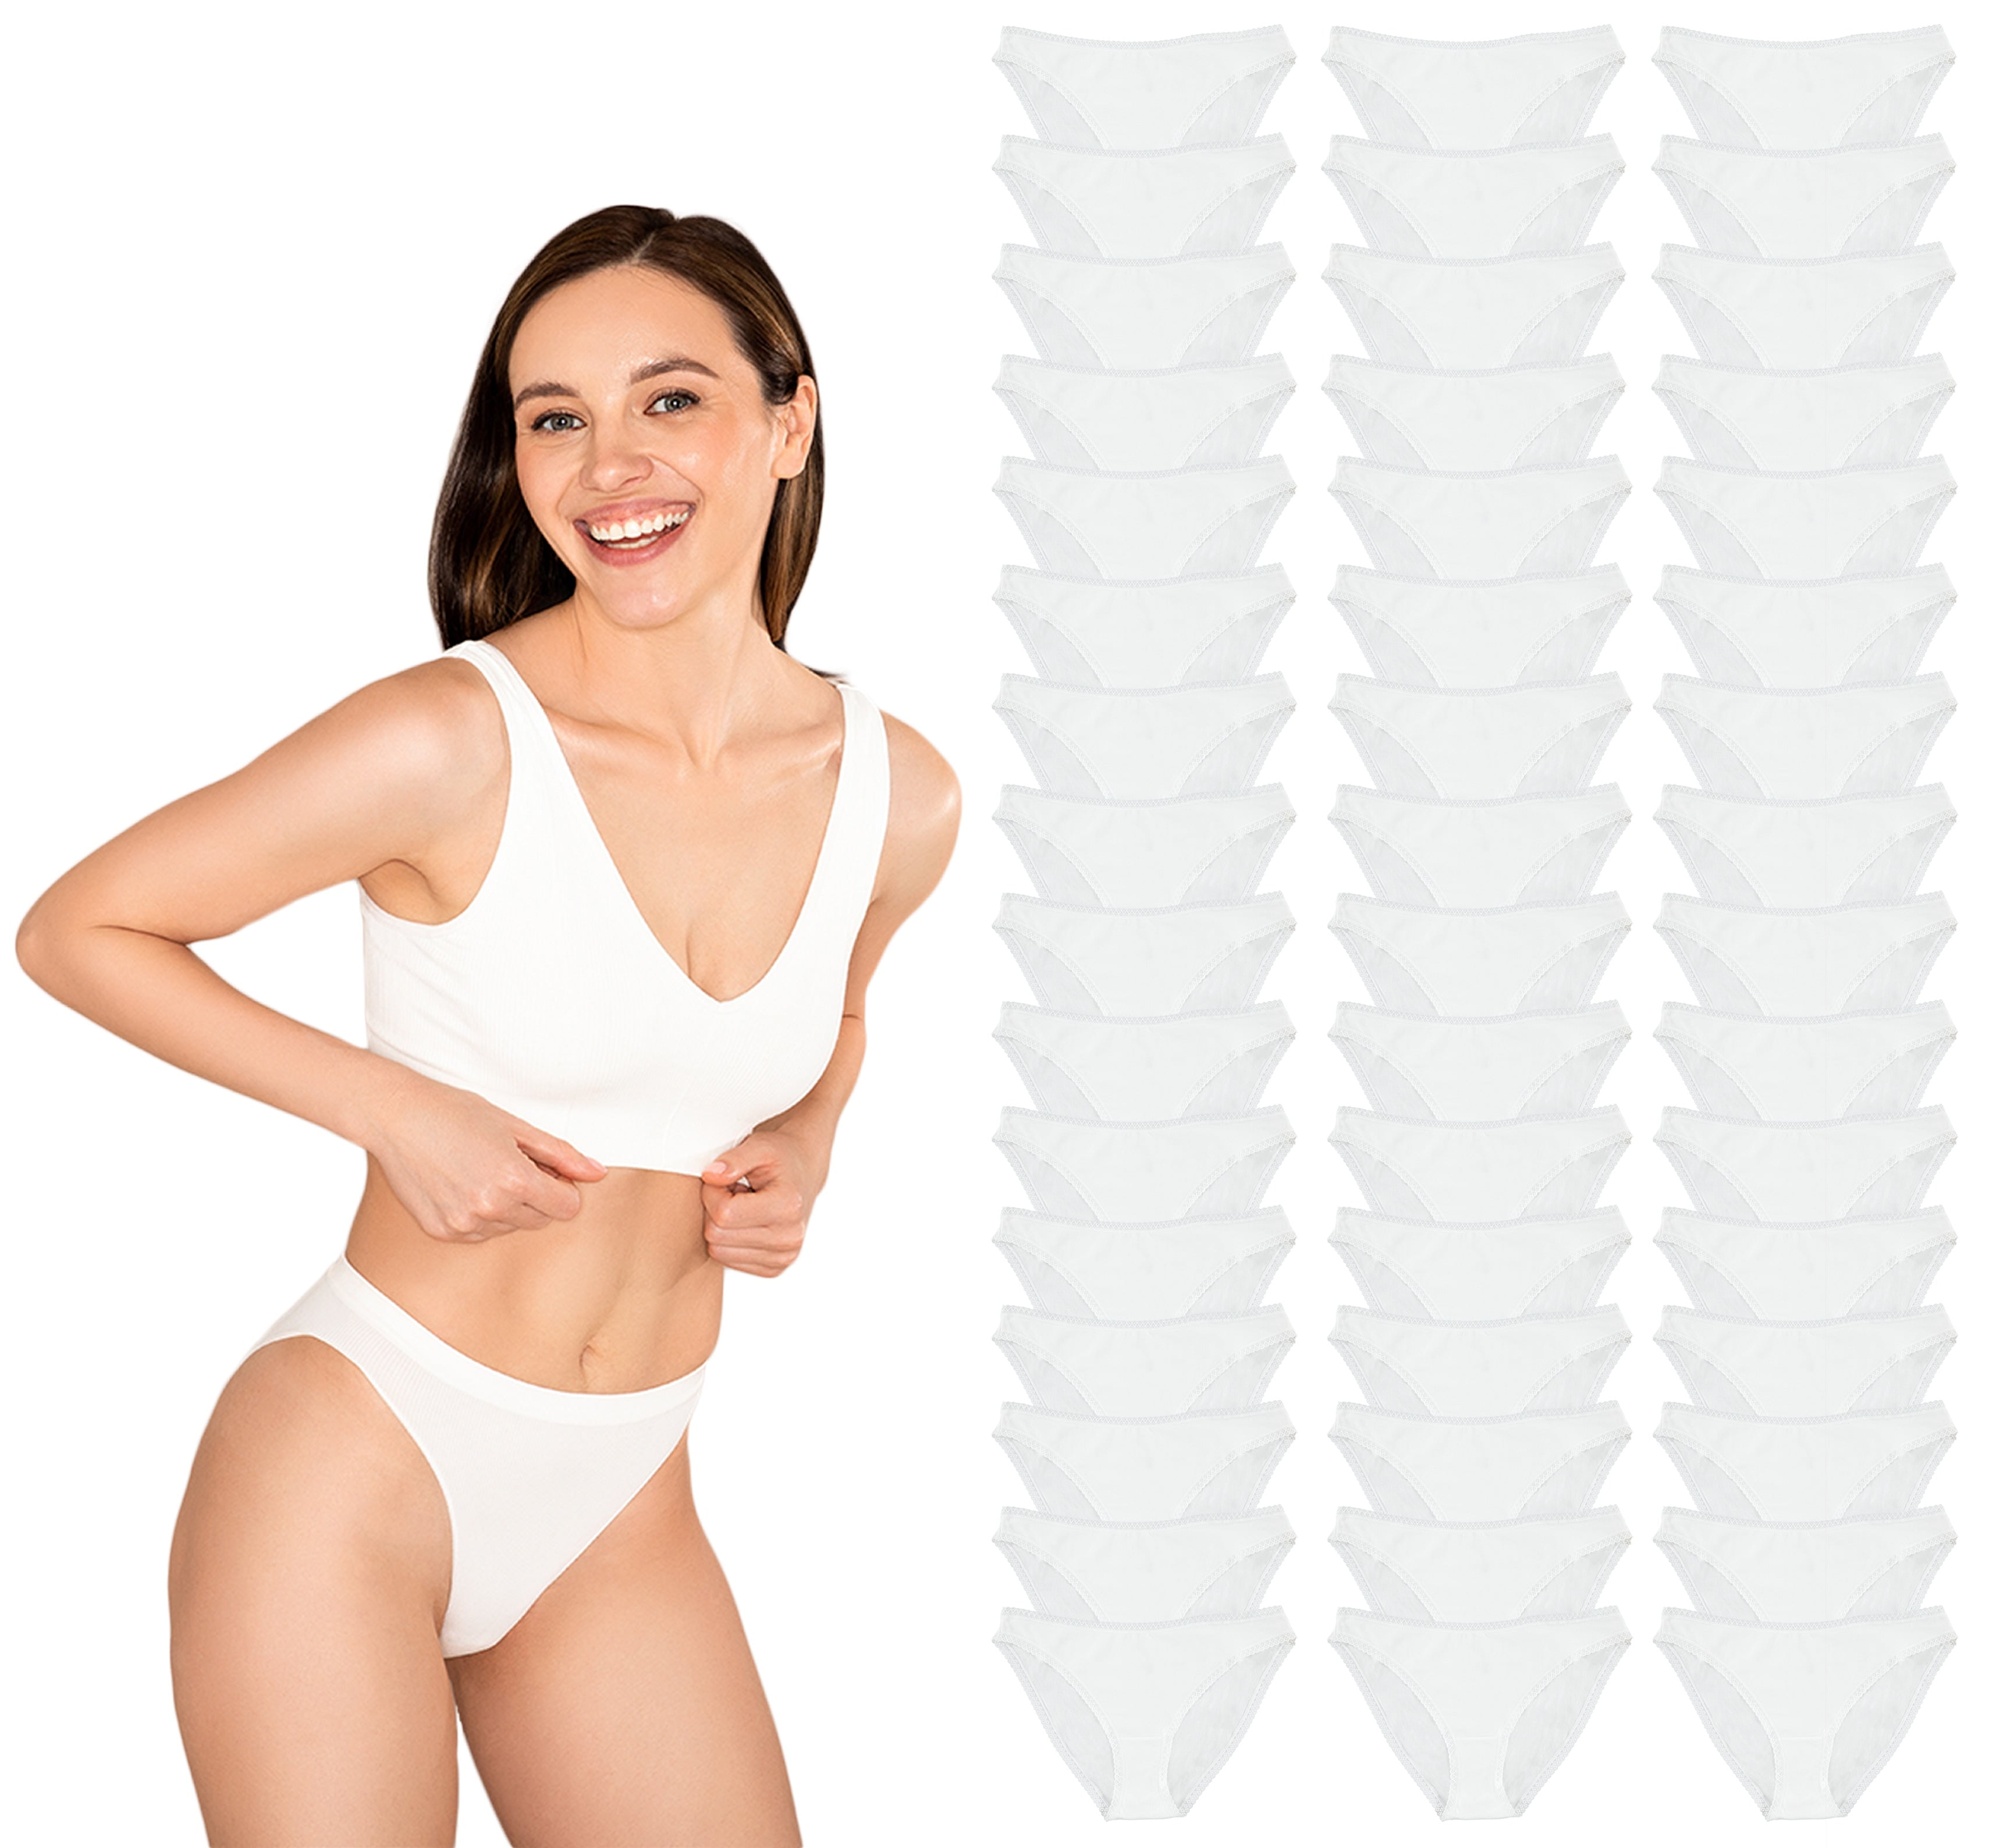 100 Pieces Undies'nbulk Assorted Cuts And Prints 95% Cotton Women's Panties  Size Xlarge Bulk Buy - Womens Charity Clothing for The Homeless